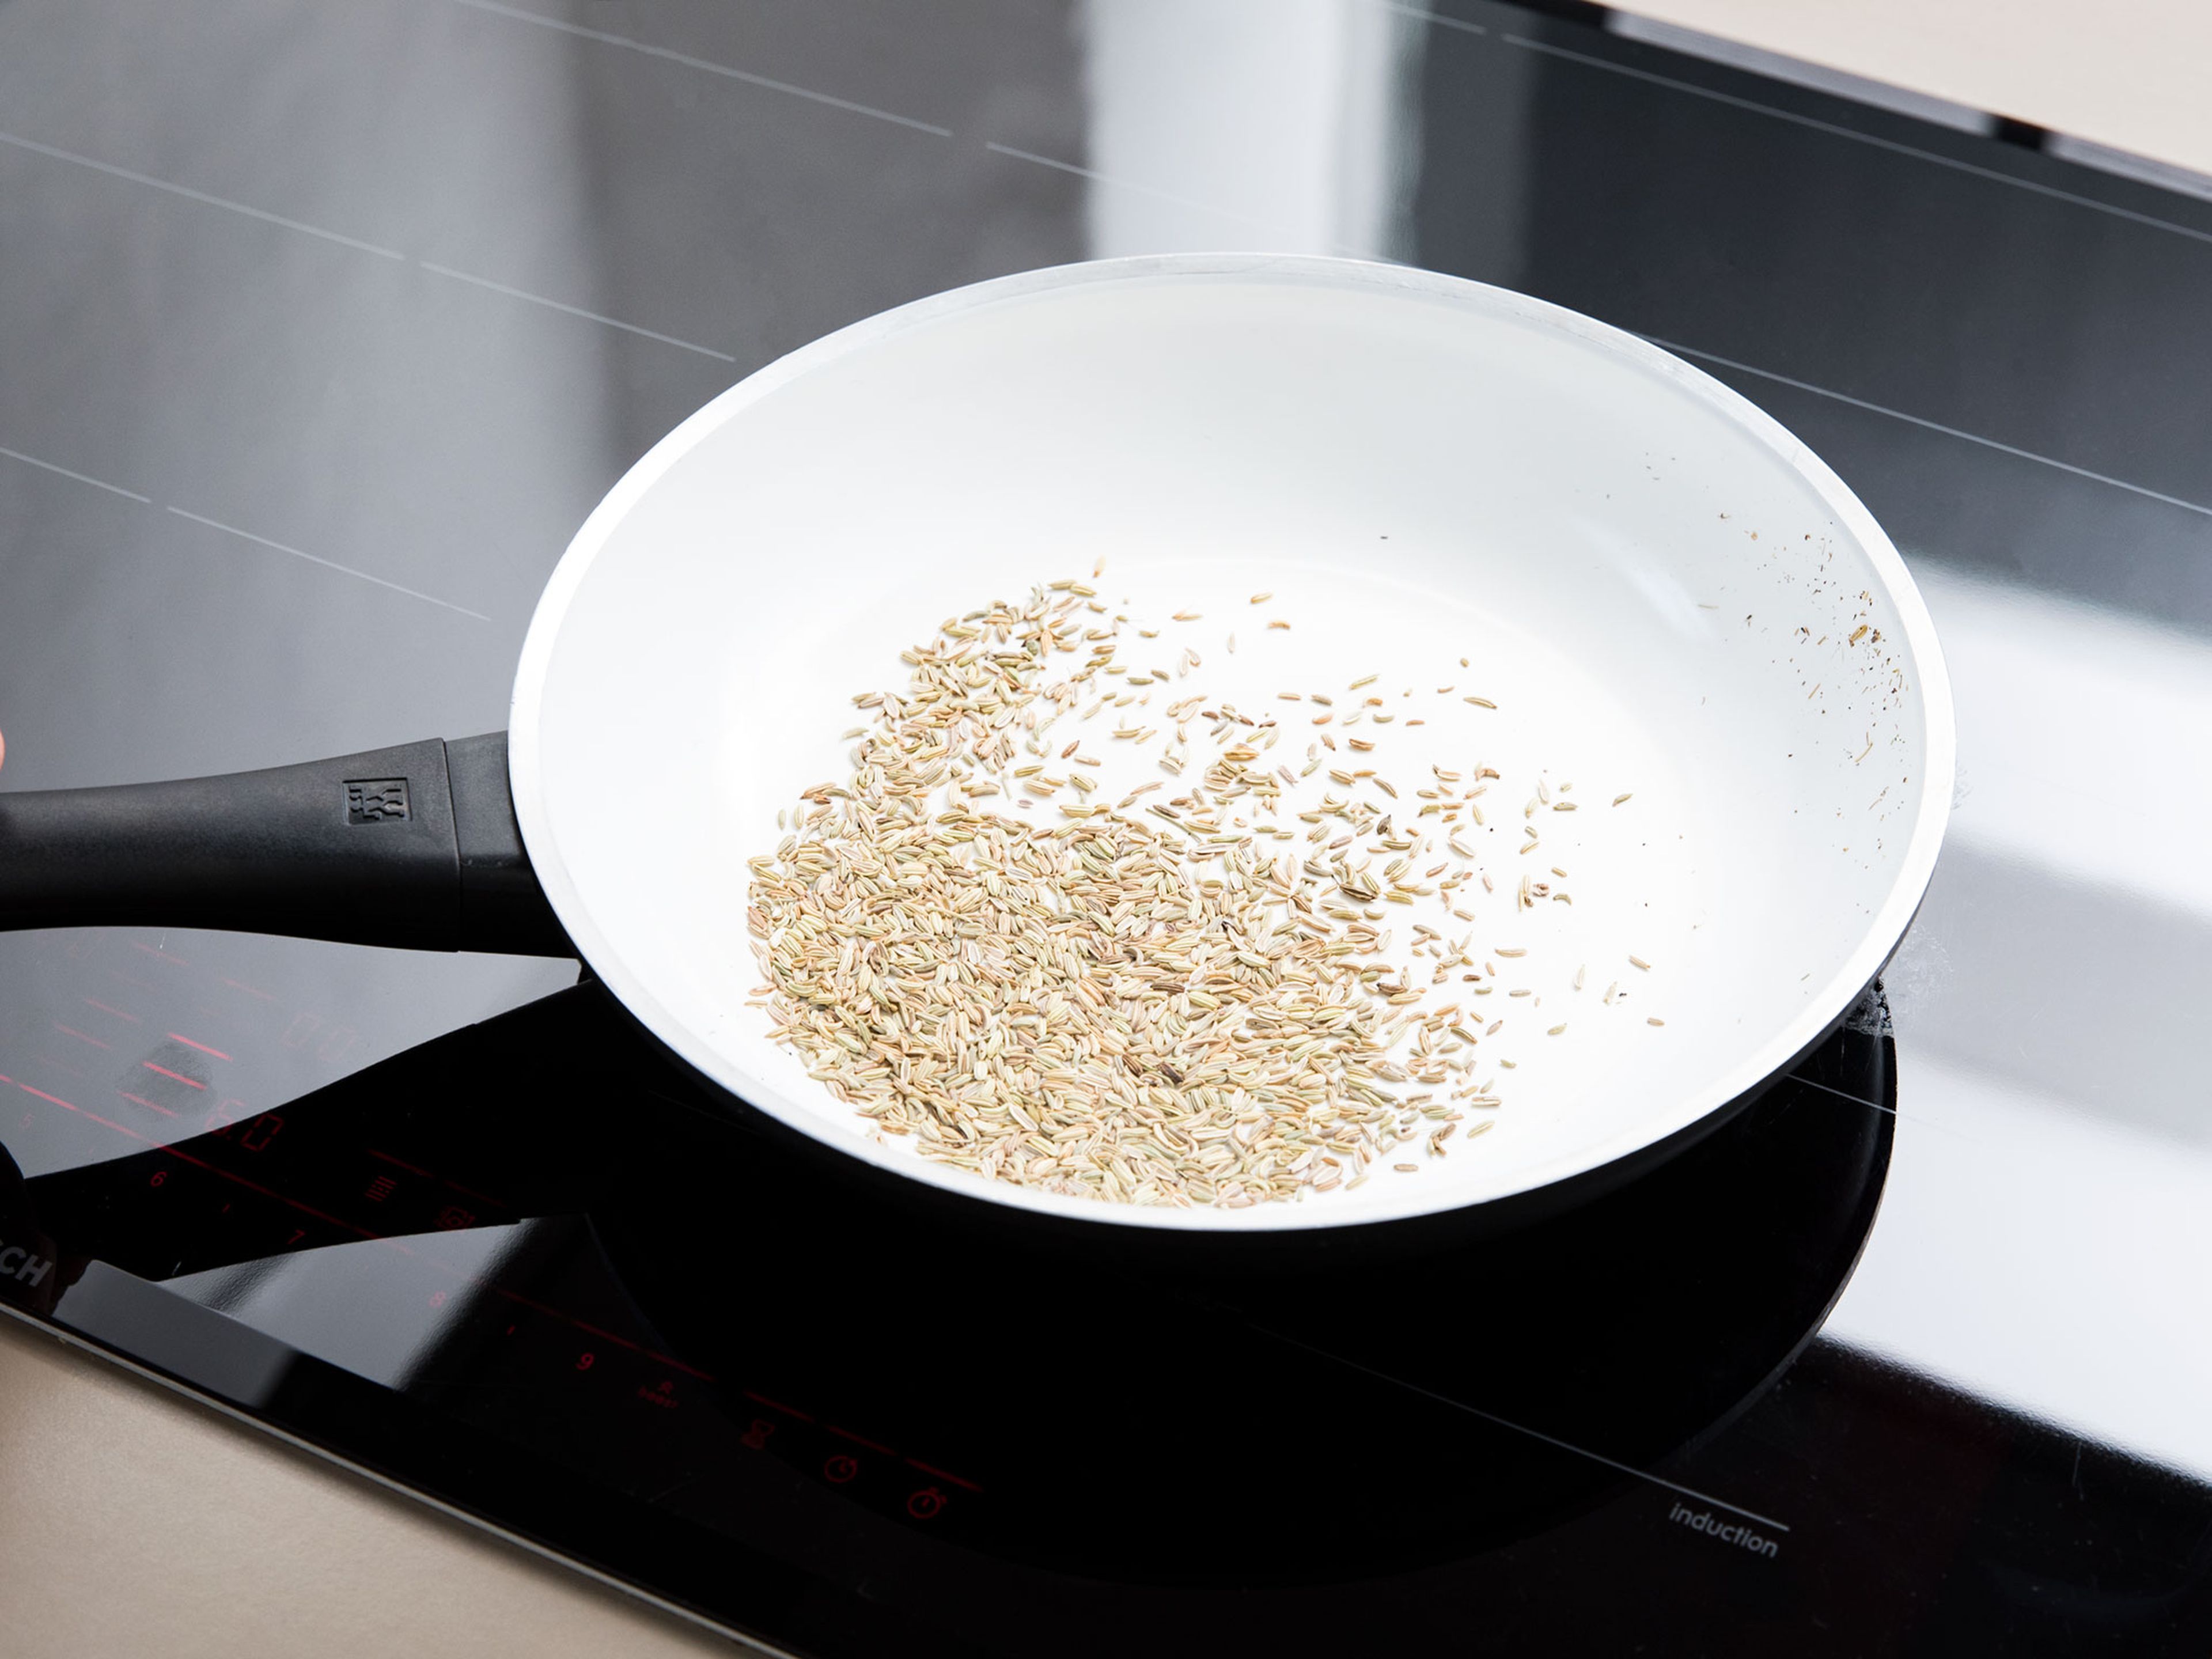 Toast fennel seeds in a frying pan over medium-low heat until fragrant, approx. 2 min.